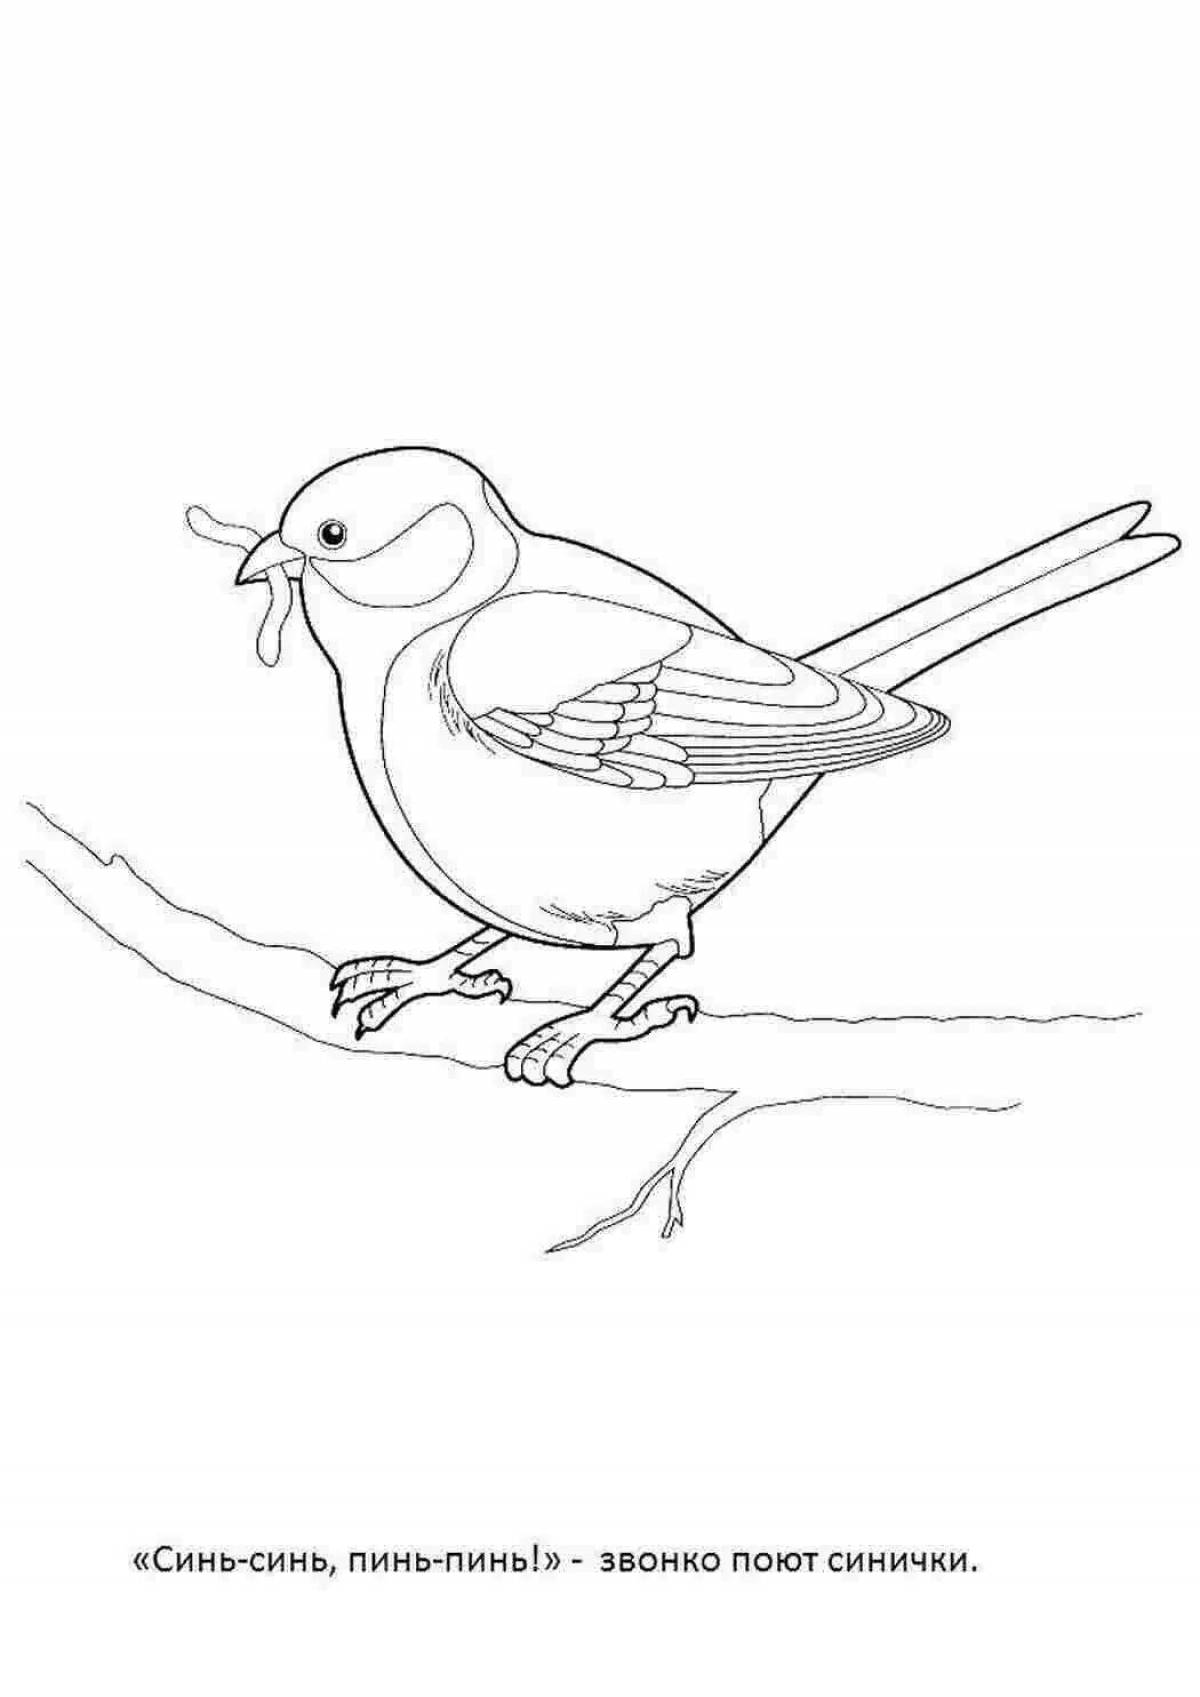 Great titmouse drawing for schoolchildren